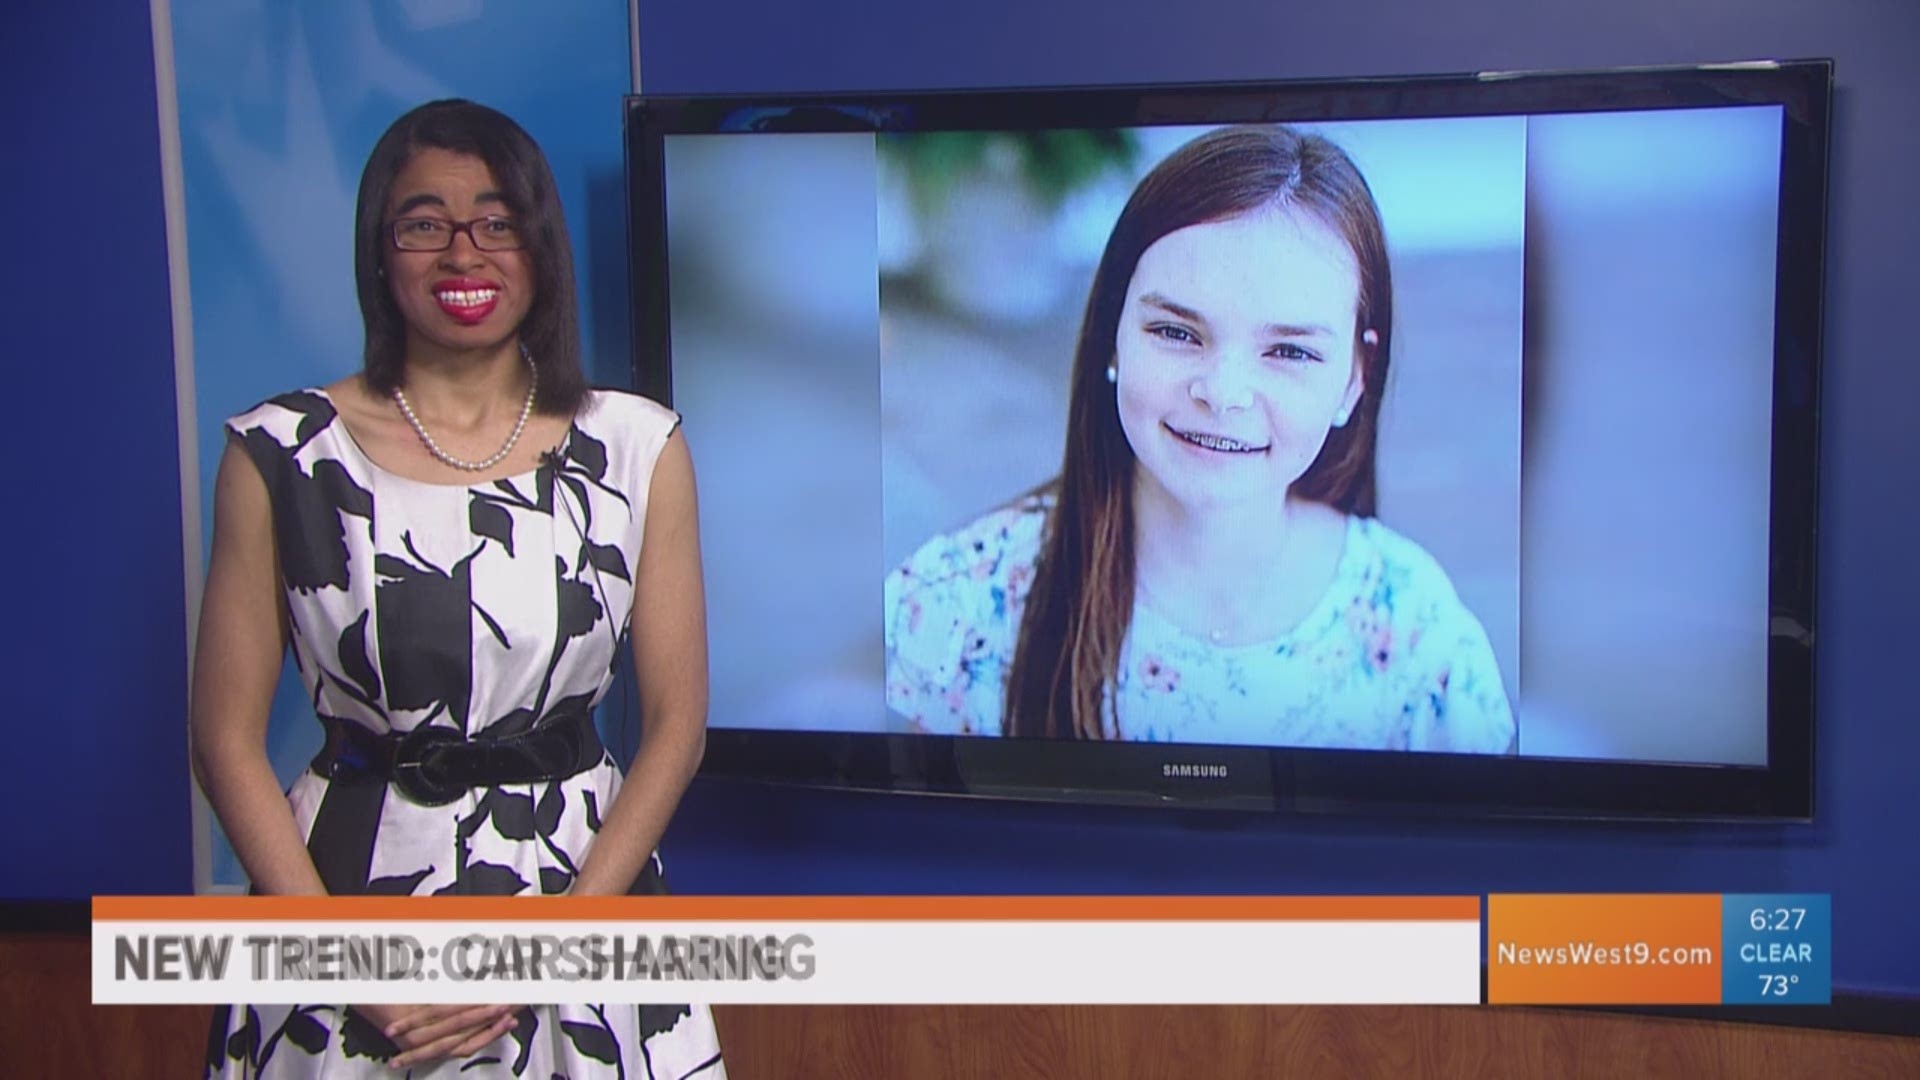 A 12-year-old girl from Connecticut has an autoimmune disease and is using her own experience with IVs to help other kids undergo treatments with a friendlier face. Check it out!